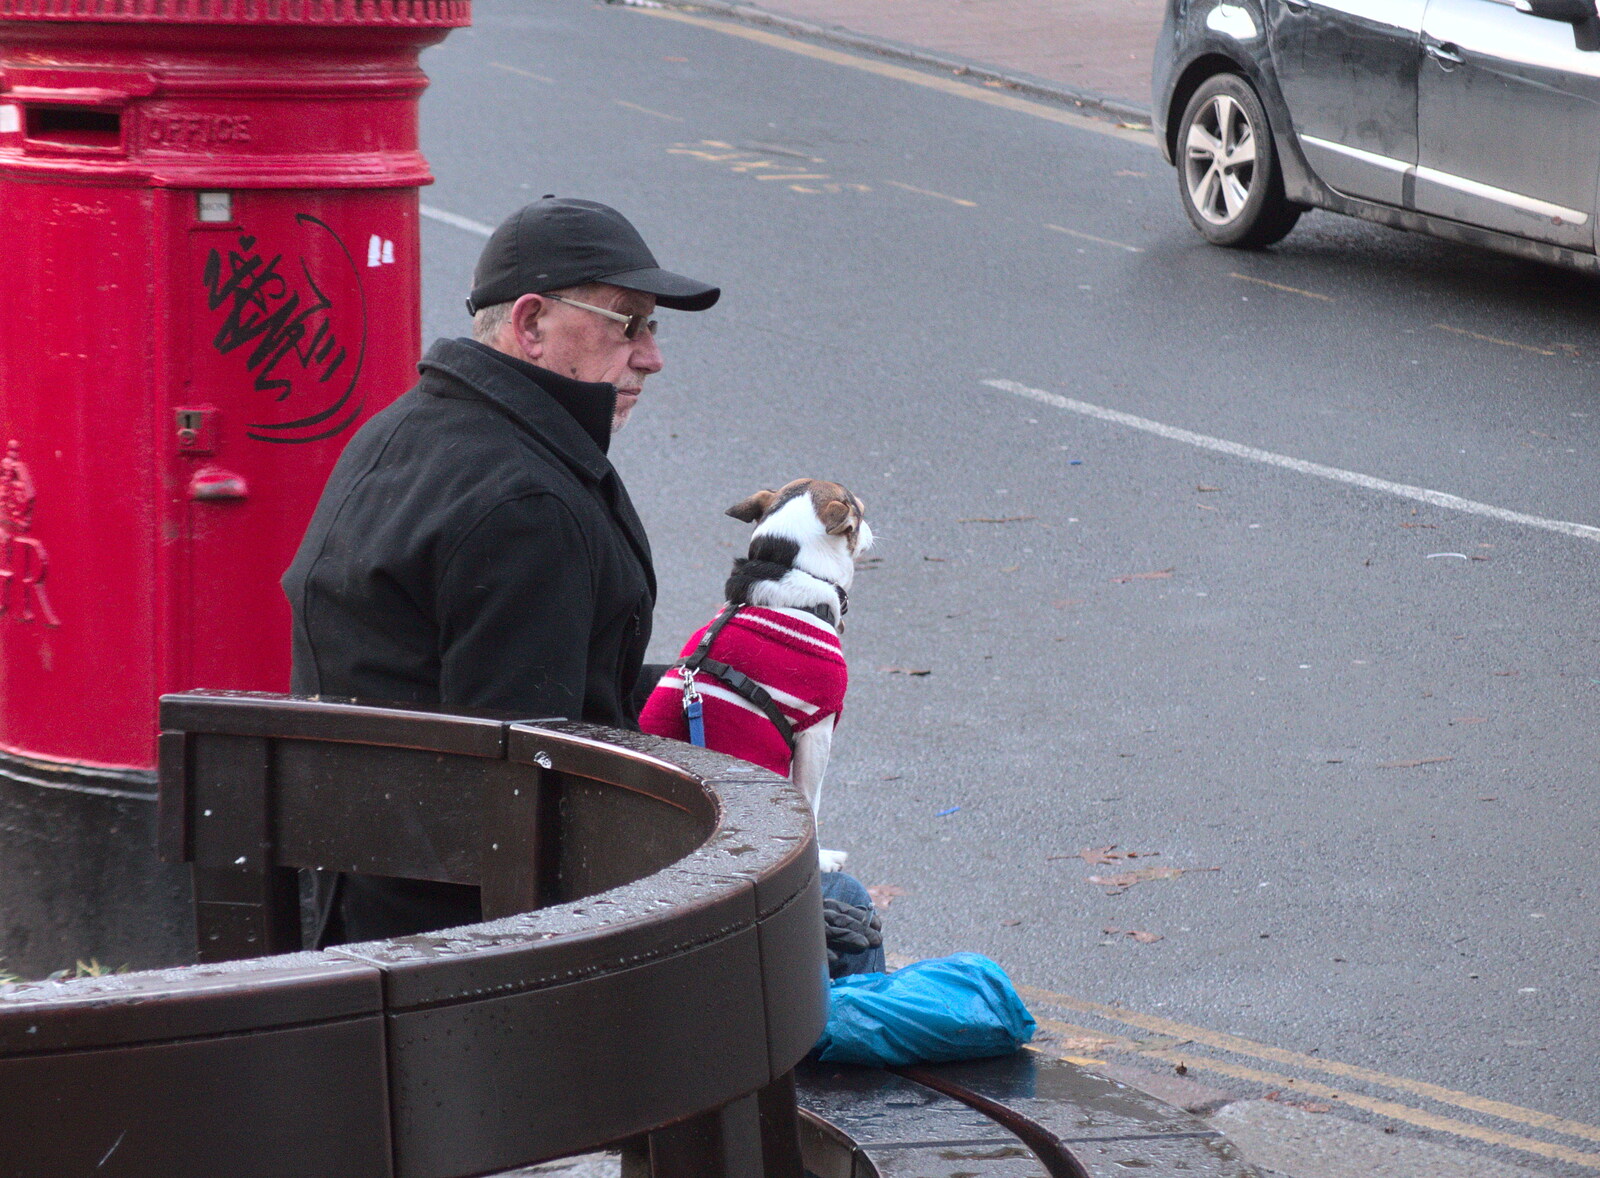 One man and his dog from A Spot of Christmas Shopping, Norwich, Norfolk - 16th December 2018